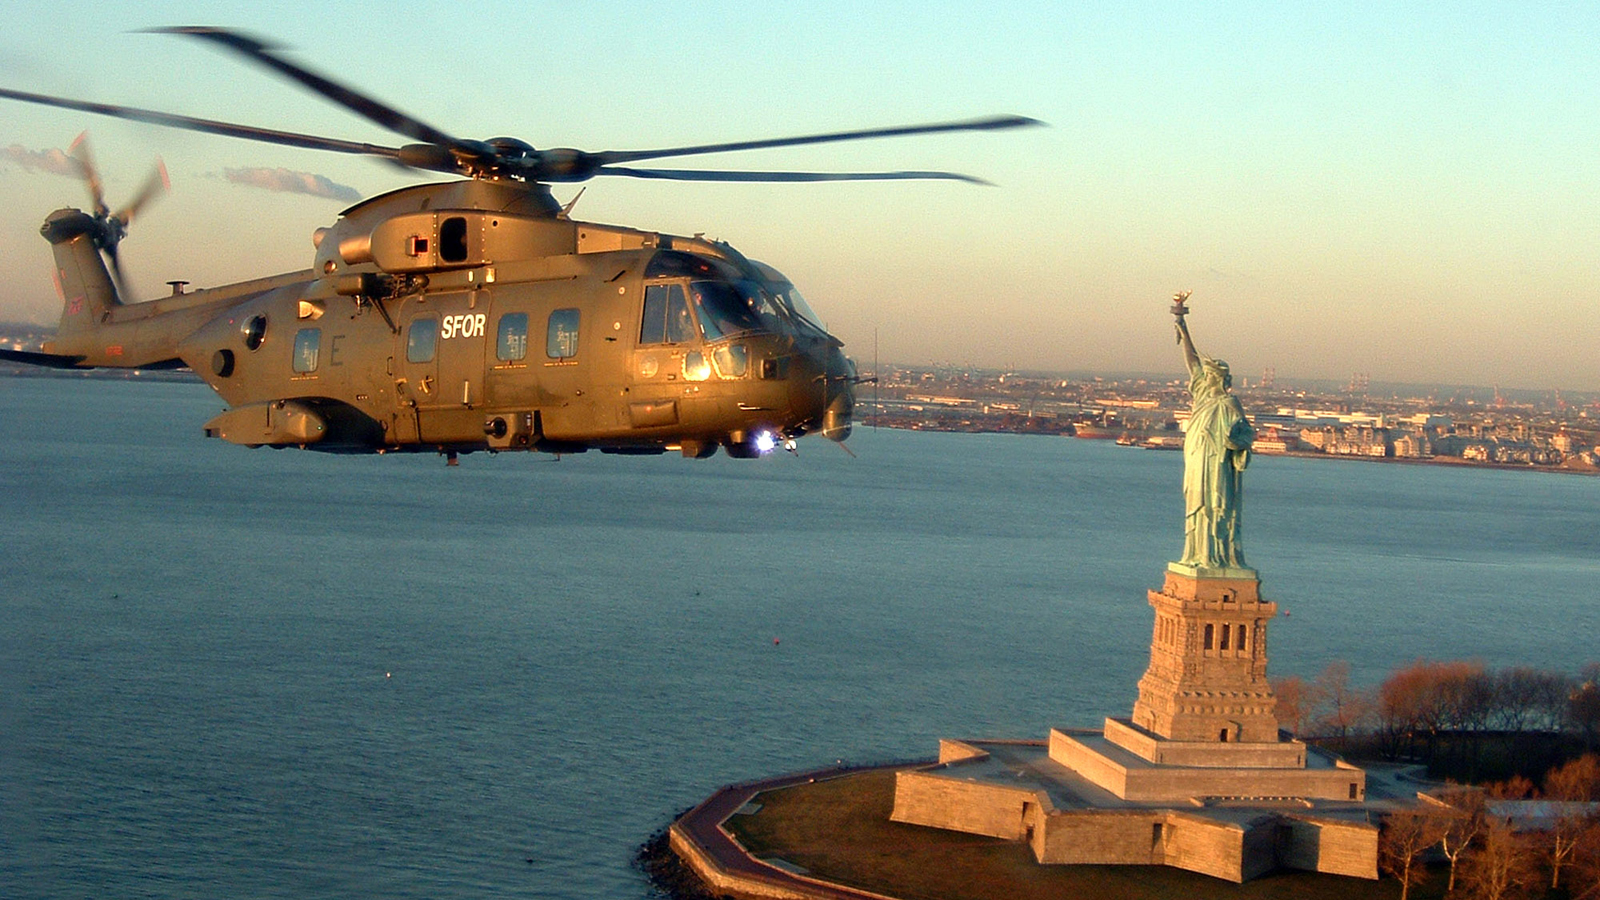 Meet The $13 Billion Presidential Helicopters The US Scrapped And Sold To Canada